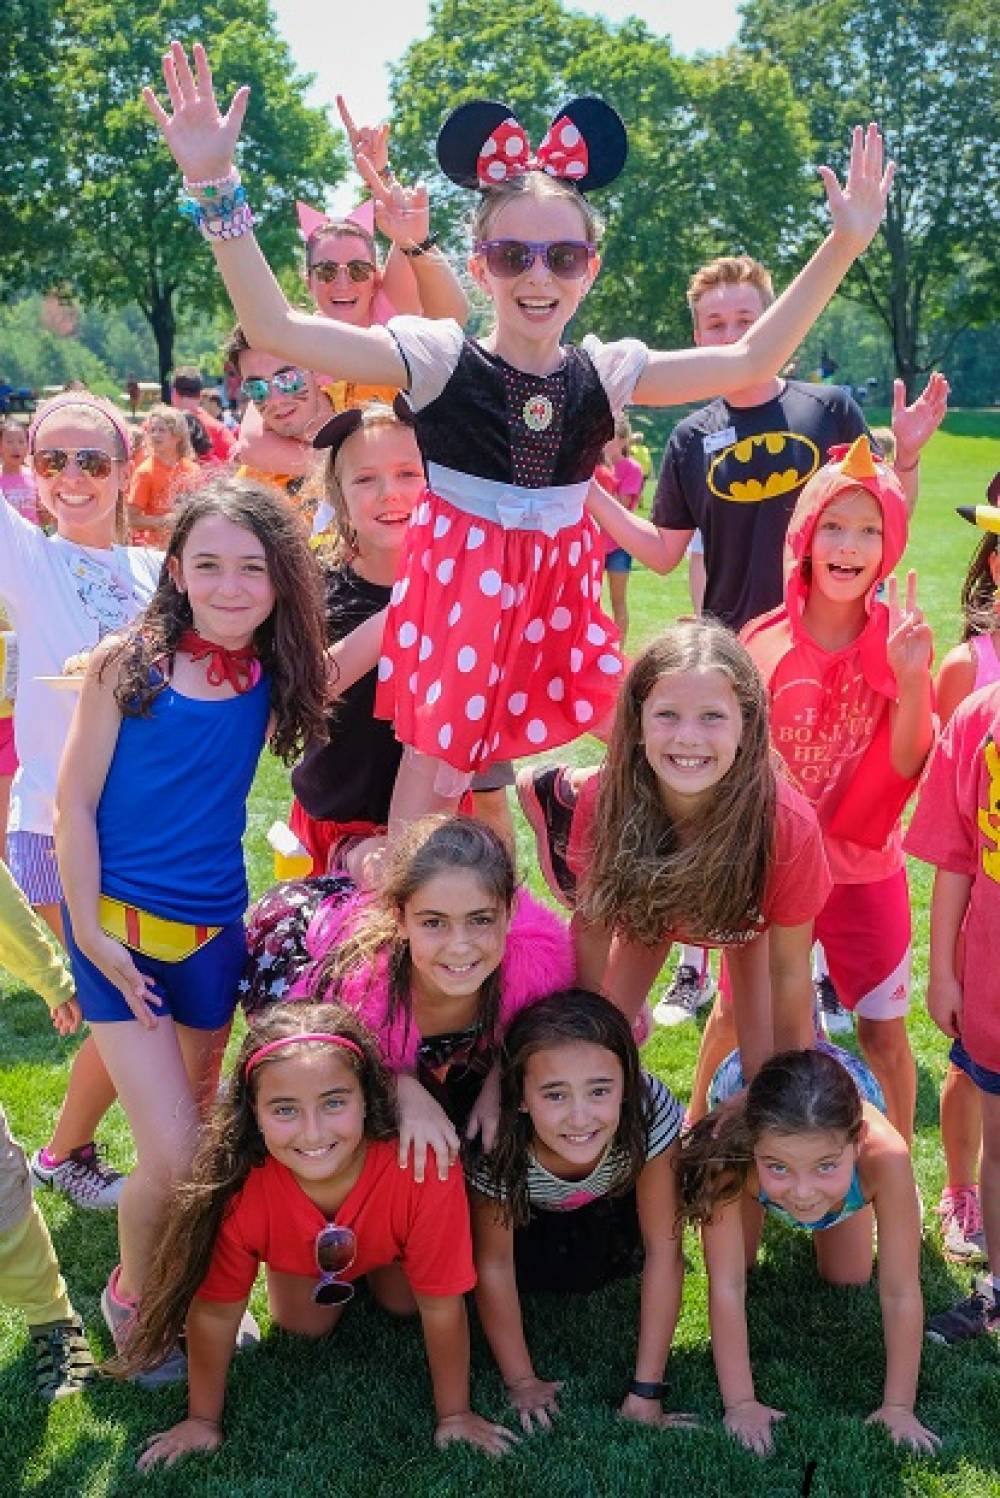 TOP MASSACHUSETTS PERFORMING ARTS CAMP: Nobles Day Camp is a Top Performing Arts Summer Camp located in Dedham Massachusetts offering many fun and enriching Performing Arts and other camp programs. 